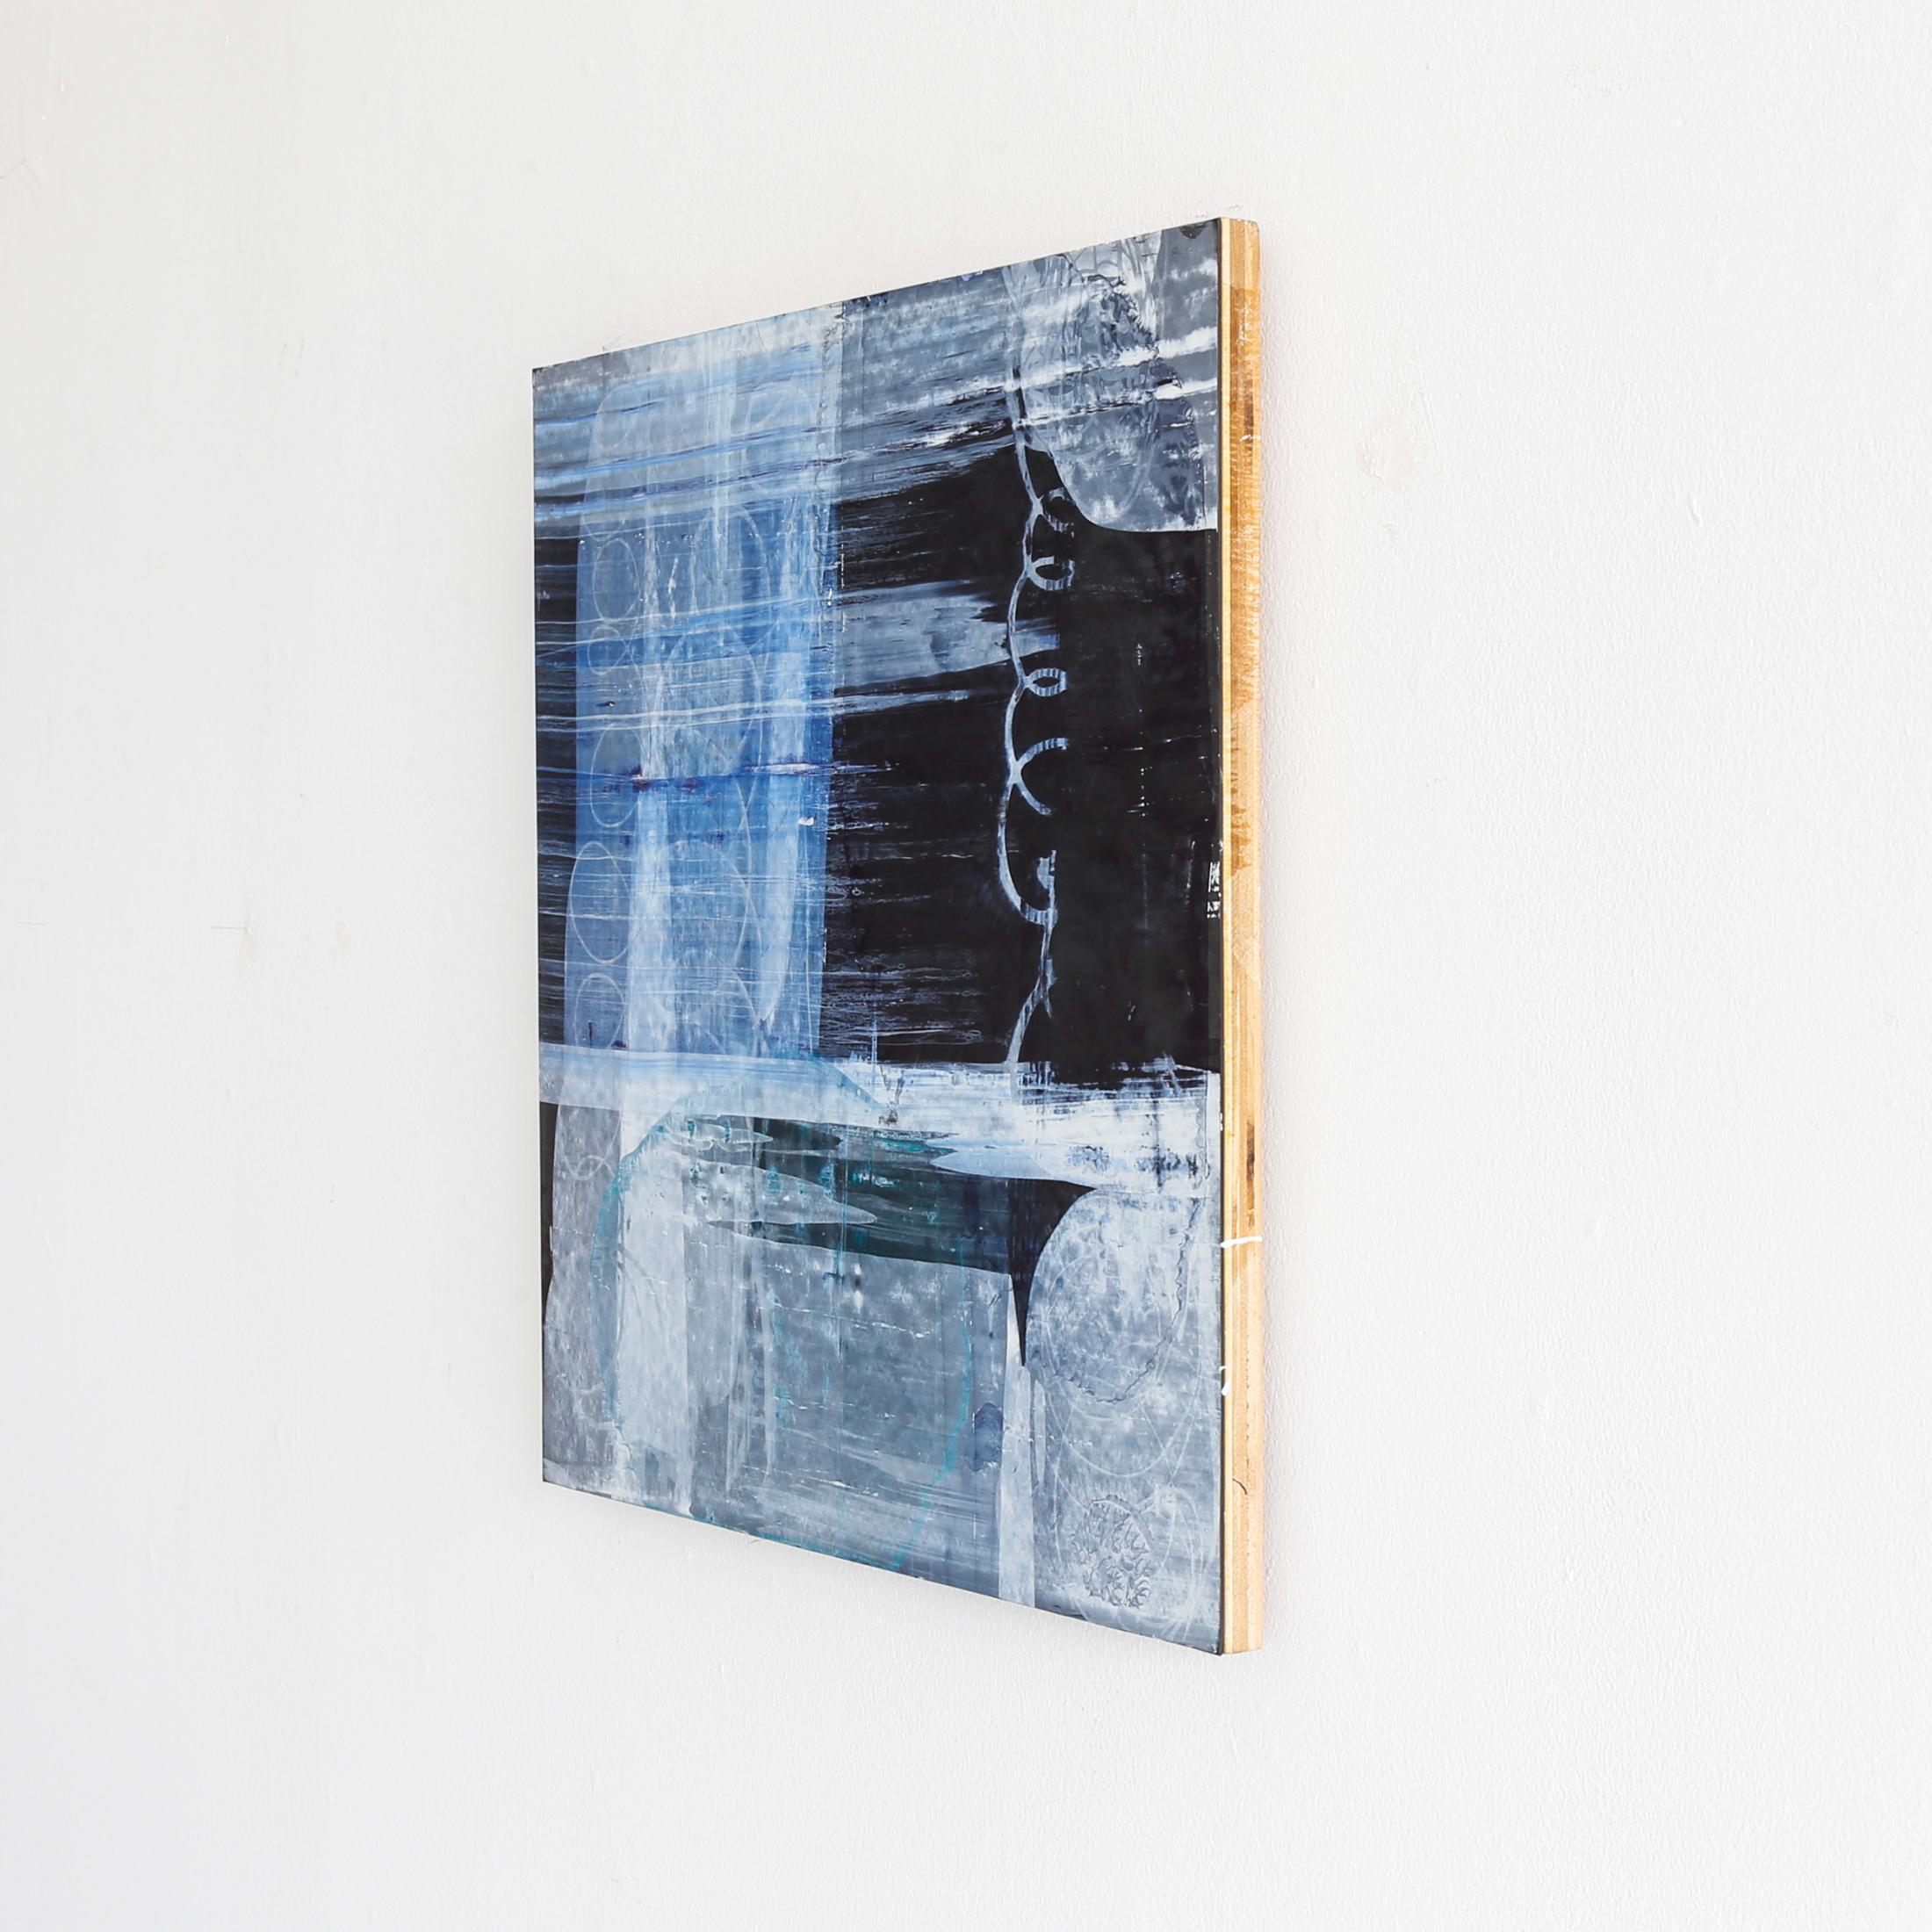 1666 Blackboard by artist Bernd Haussmann is a blue, light blue, and black contemporary mixed media piece that measures 21 x 21.

Bernd Haussmann’s artwork explores gesture, color, and texture in paintings on metal, acrylic, glass, wood, canvas and